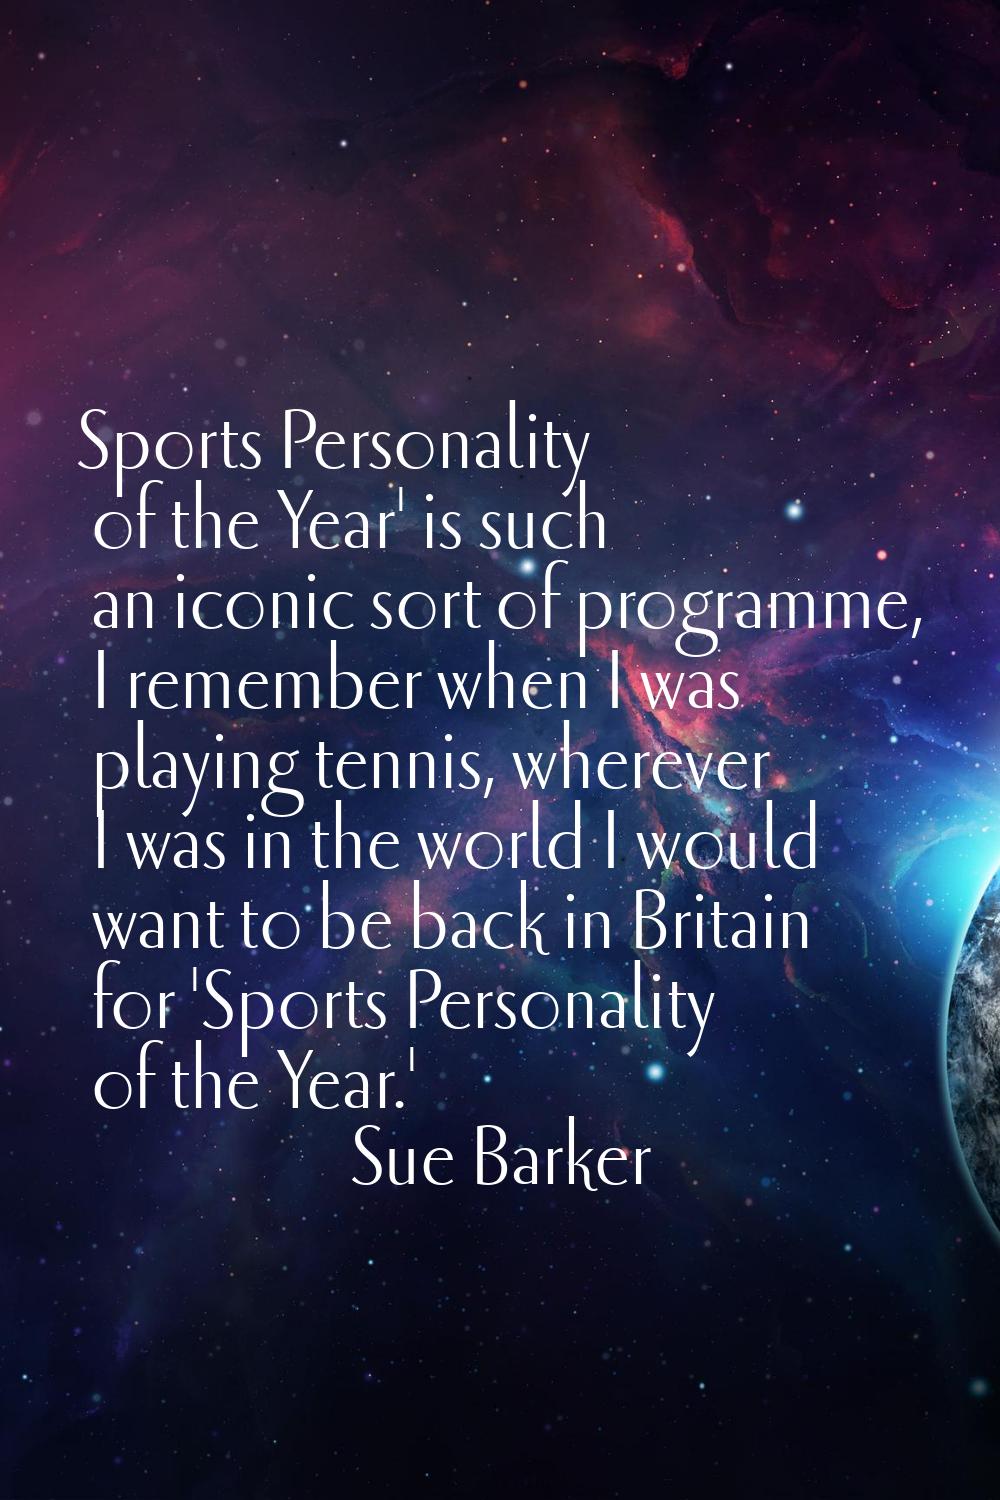 Sports Personality of the Year' is such an iconic sort of programme, I remember when I was playing 